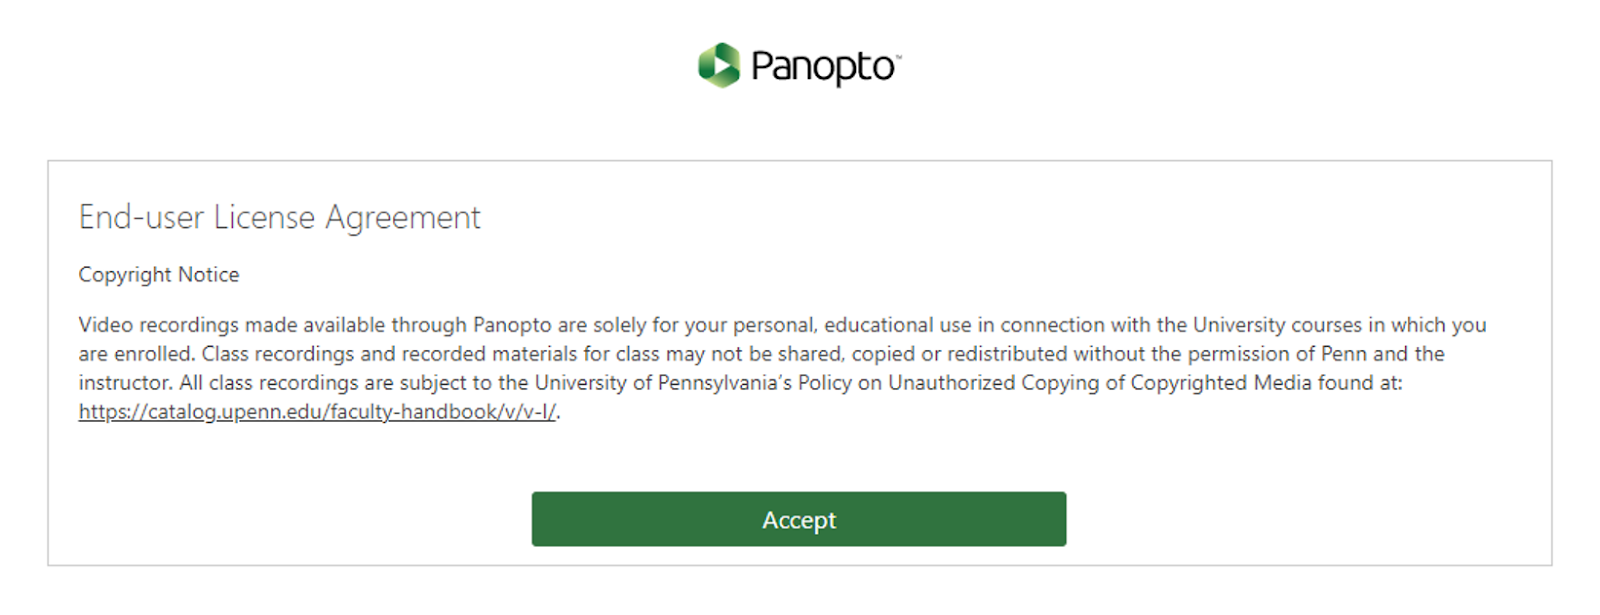 Panopto End-user License Agreement